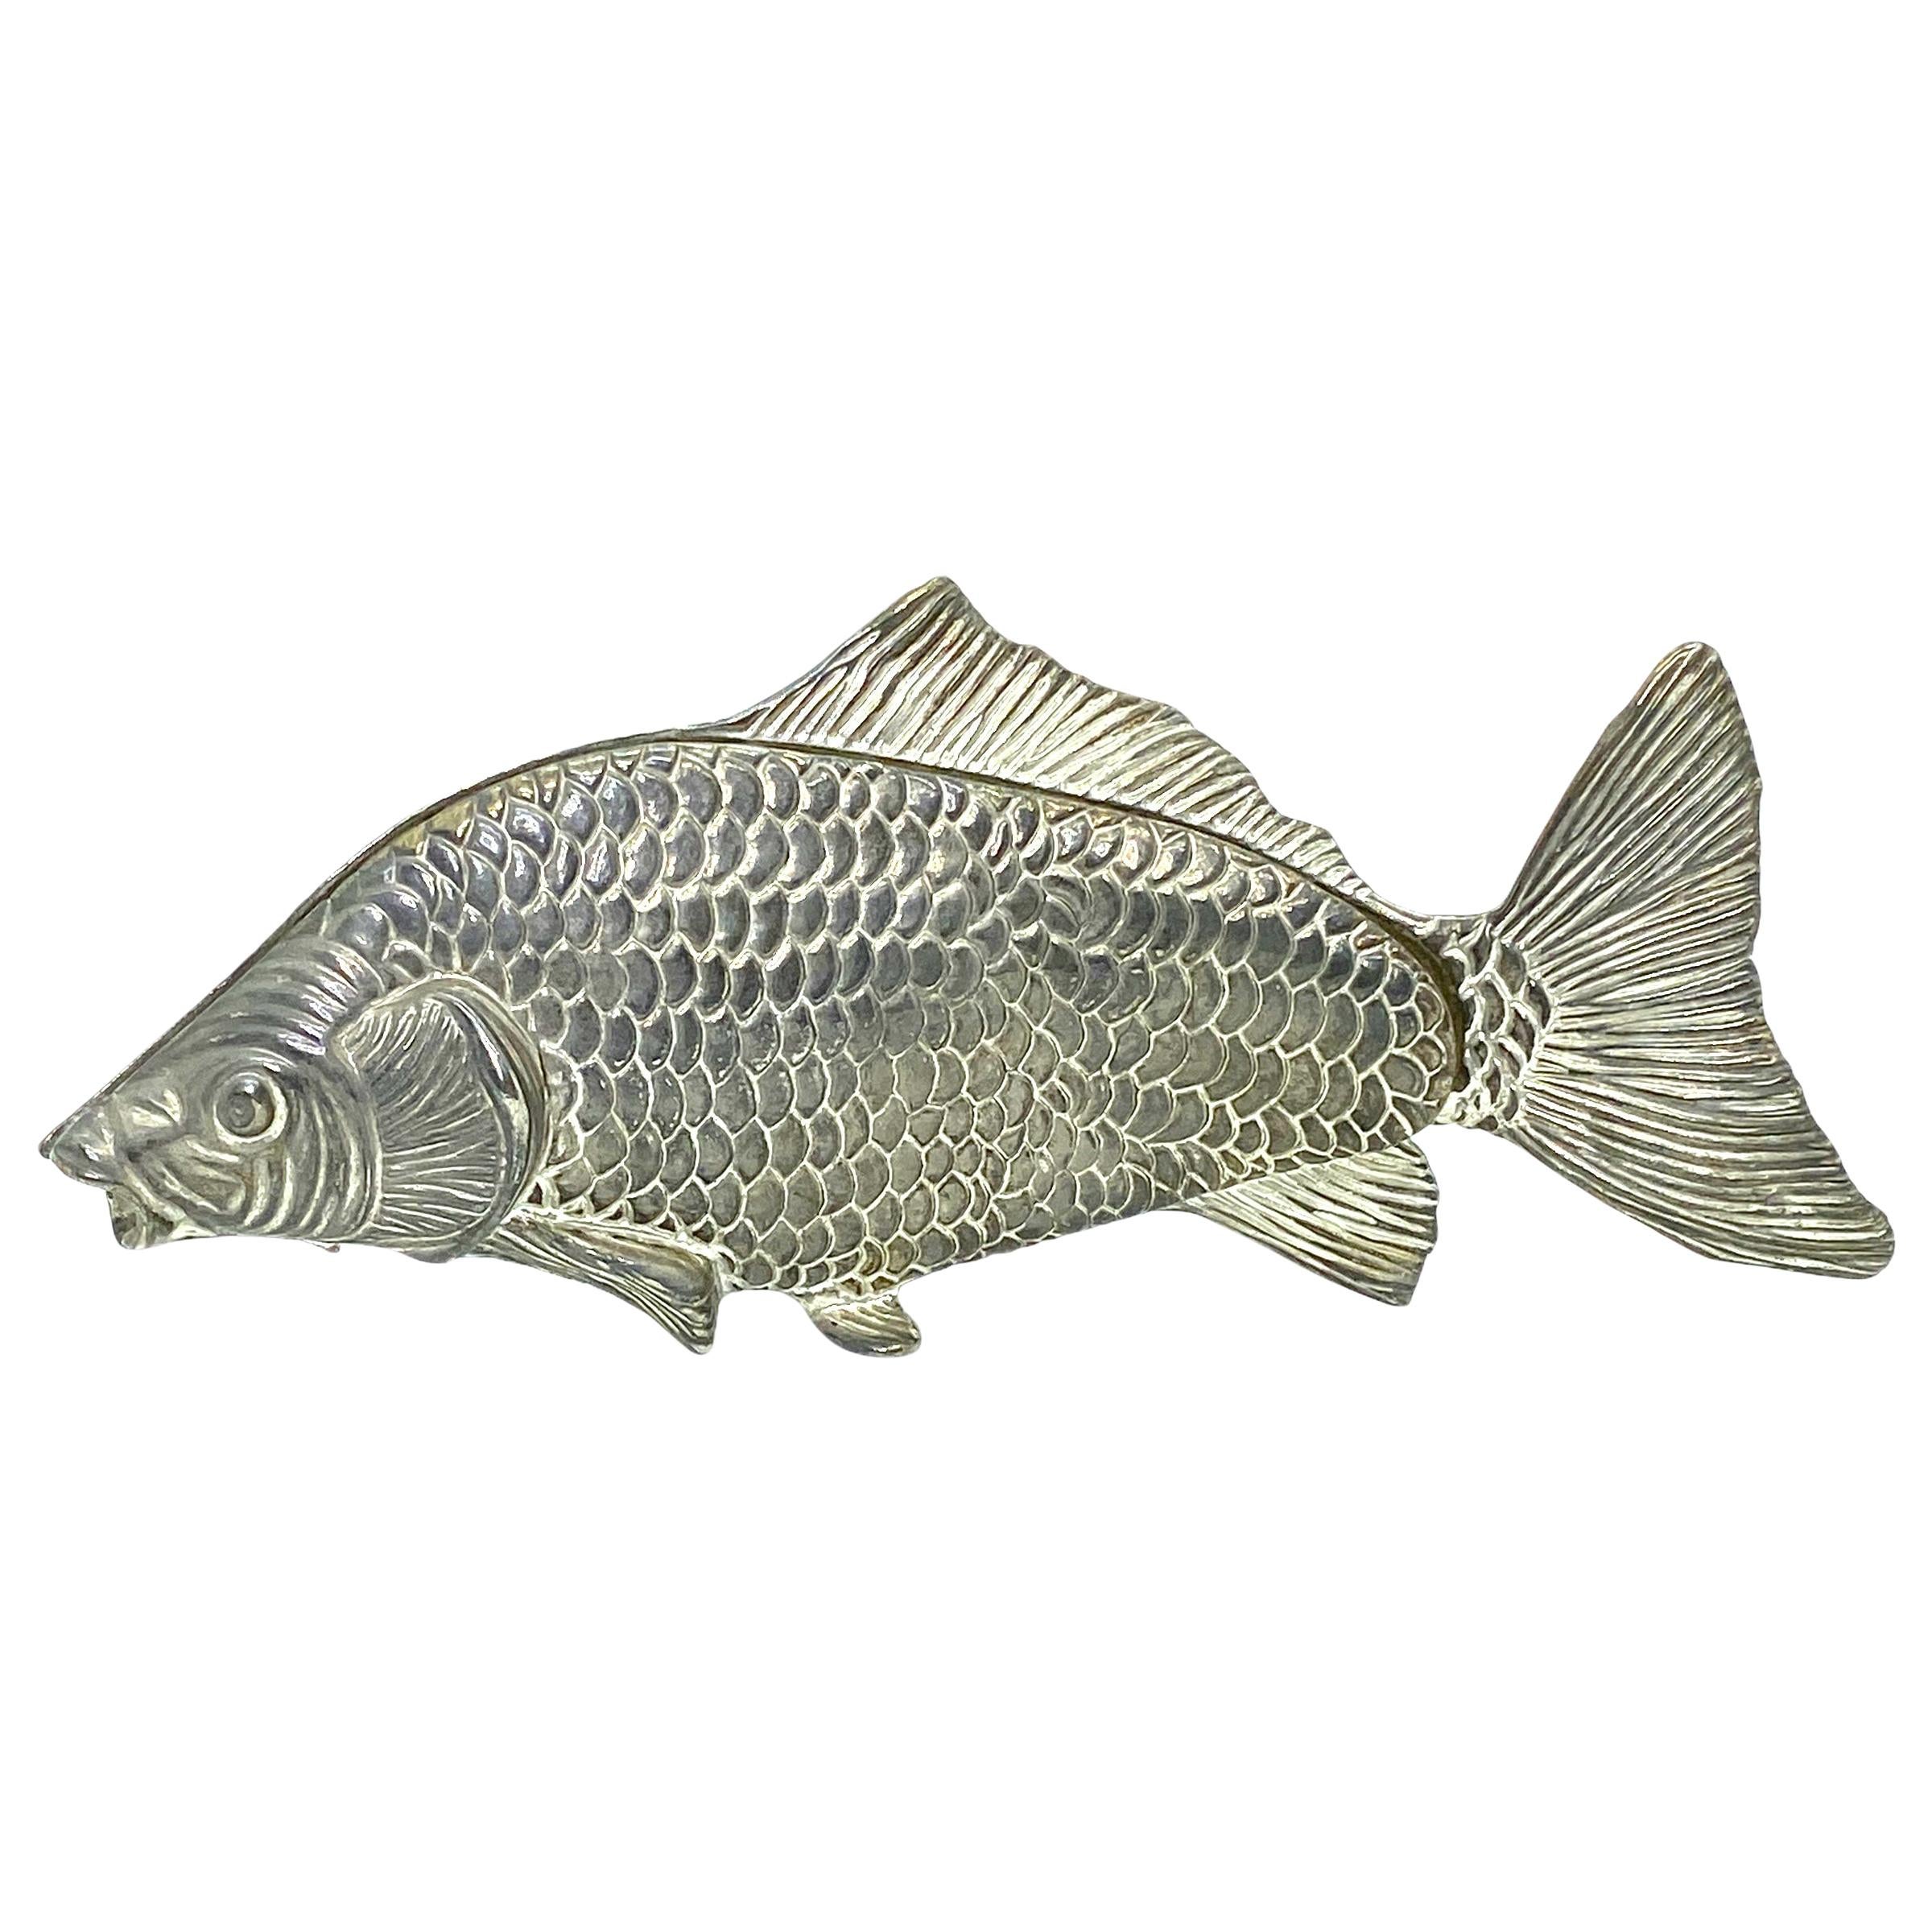 Silver Plated Koi Carp Fish Napkin Holder Stand, Germany, 1960s For Sale